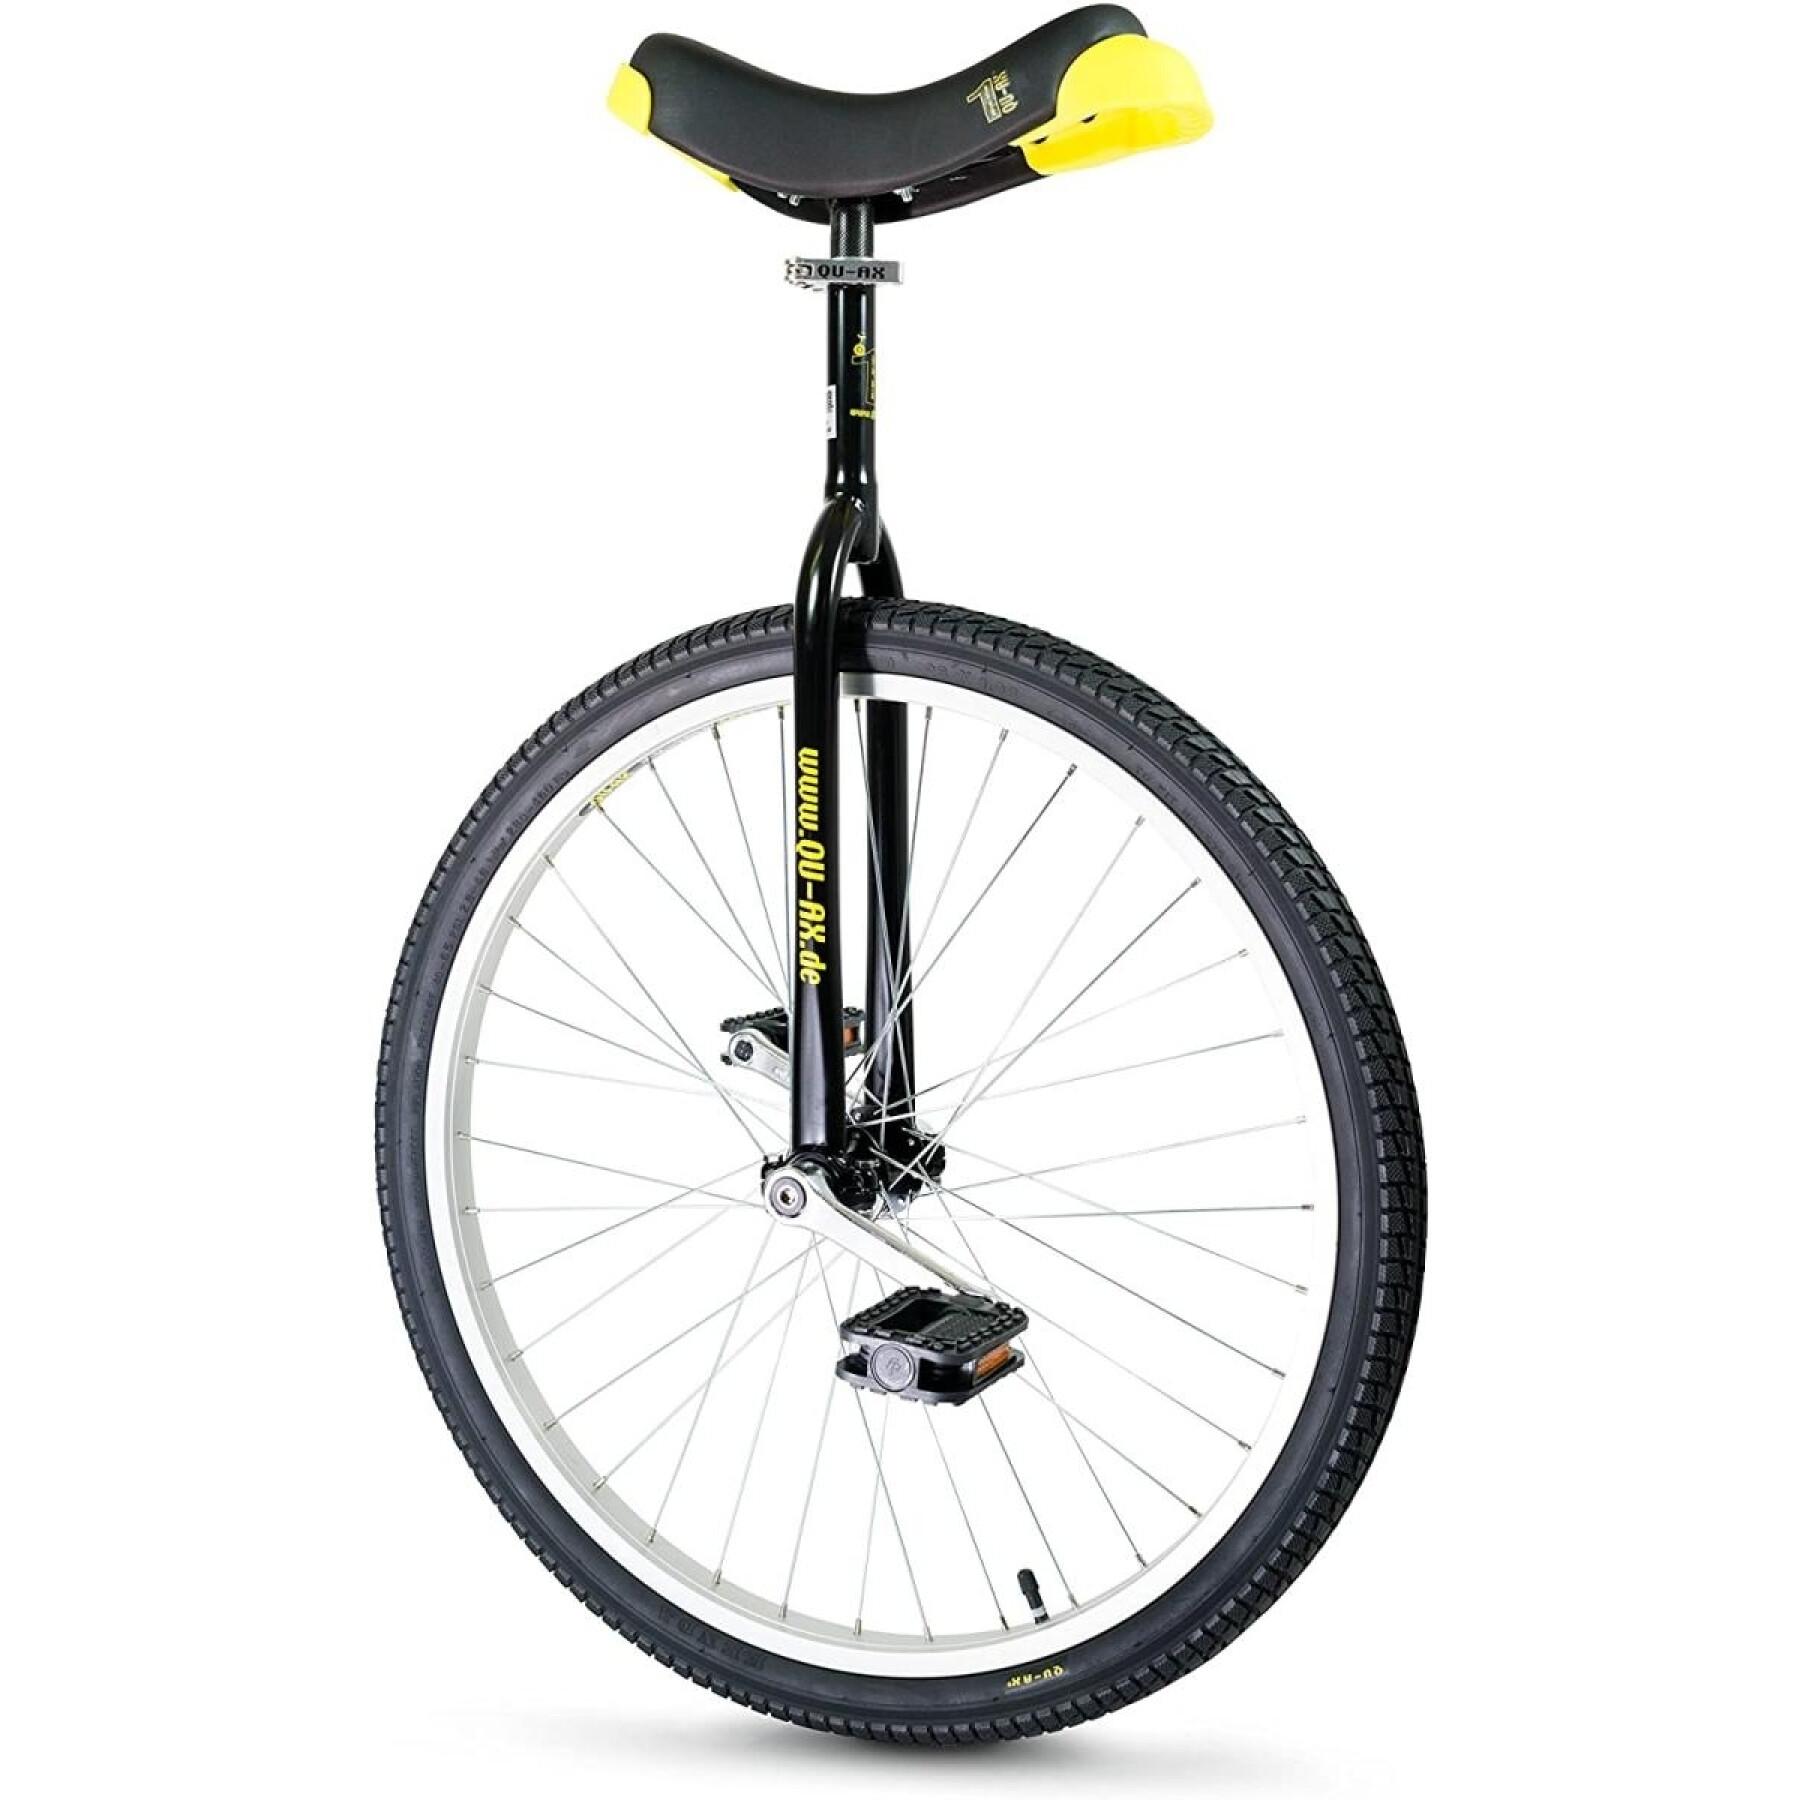 Unicycle for beginners QU-AX 26"